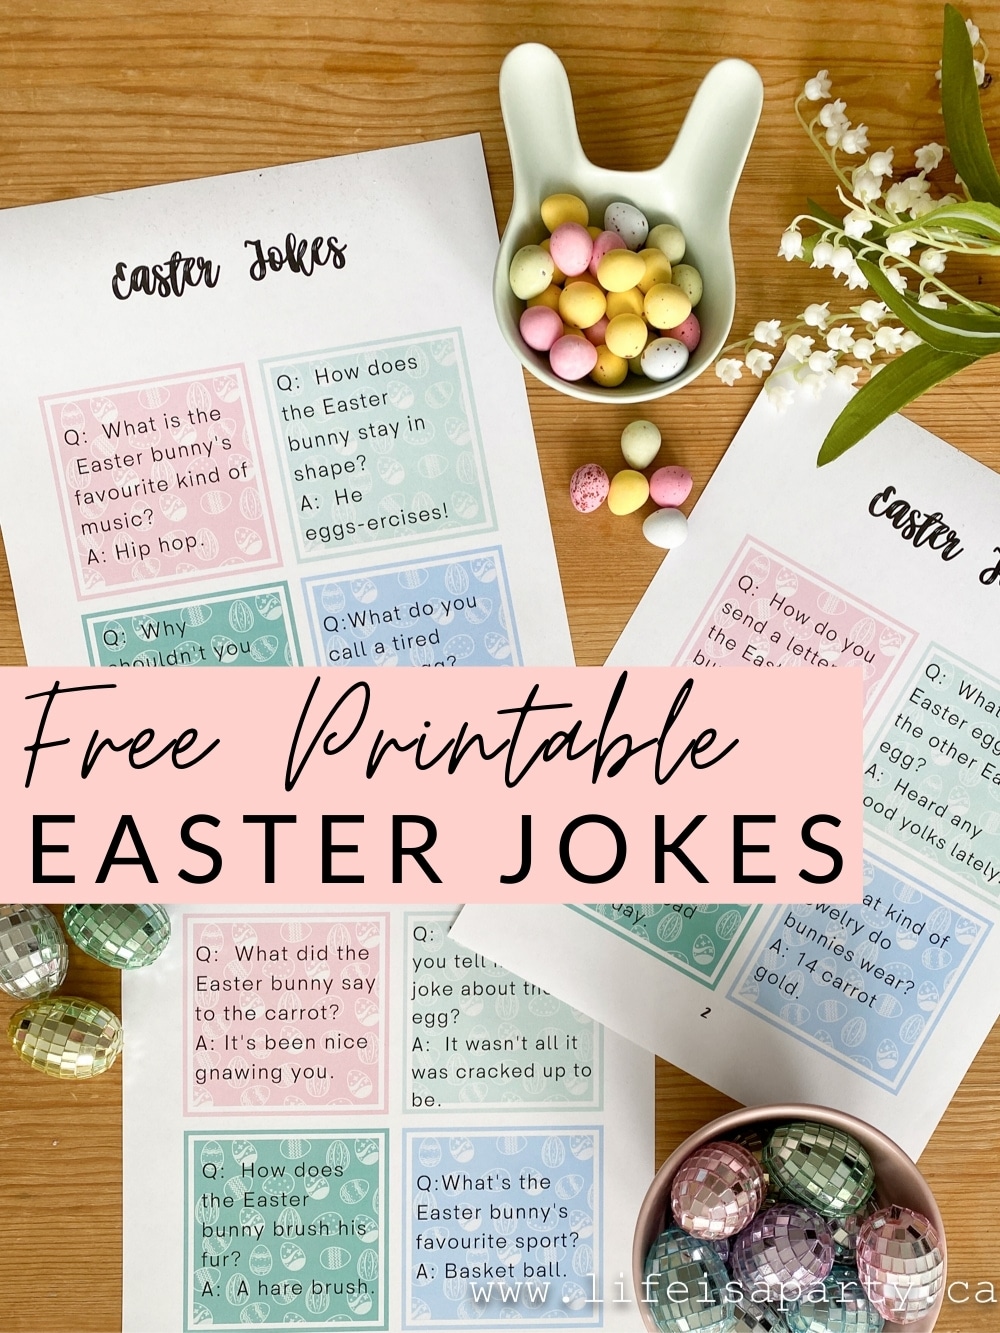 Easter Jokes: bring a smile with clean, kid-friendly jokes. Free printable perfect for egg stuffers, lunch box notes, and more.